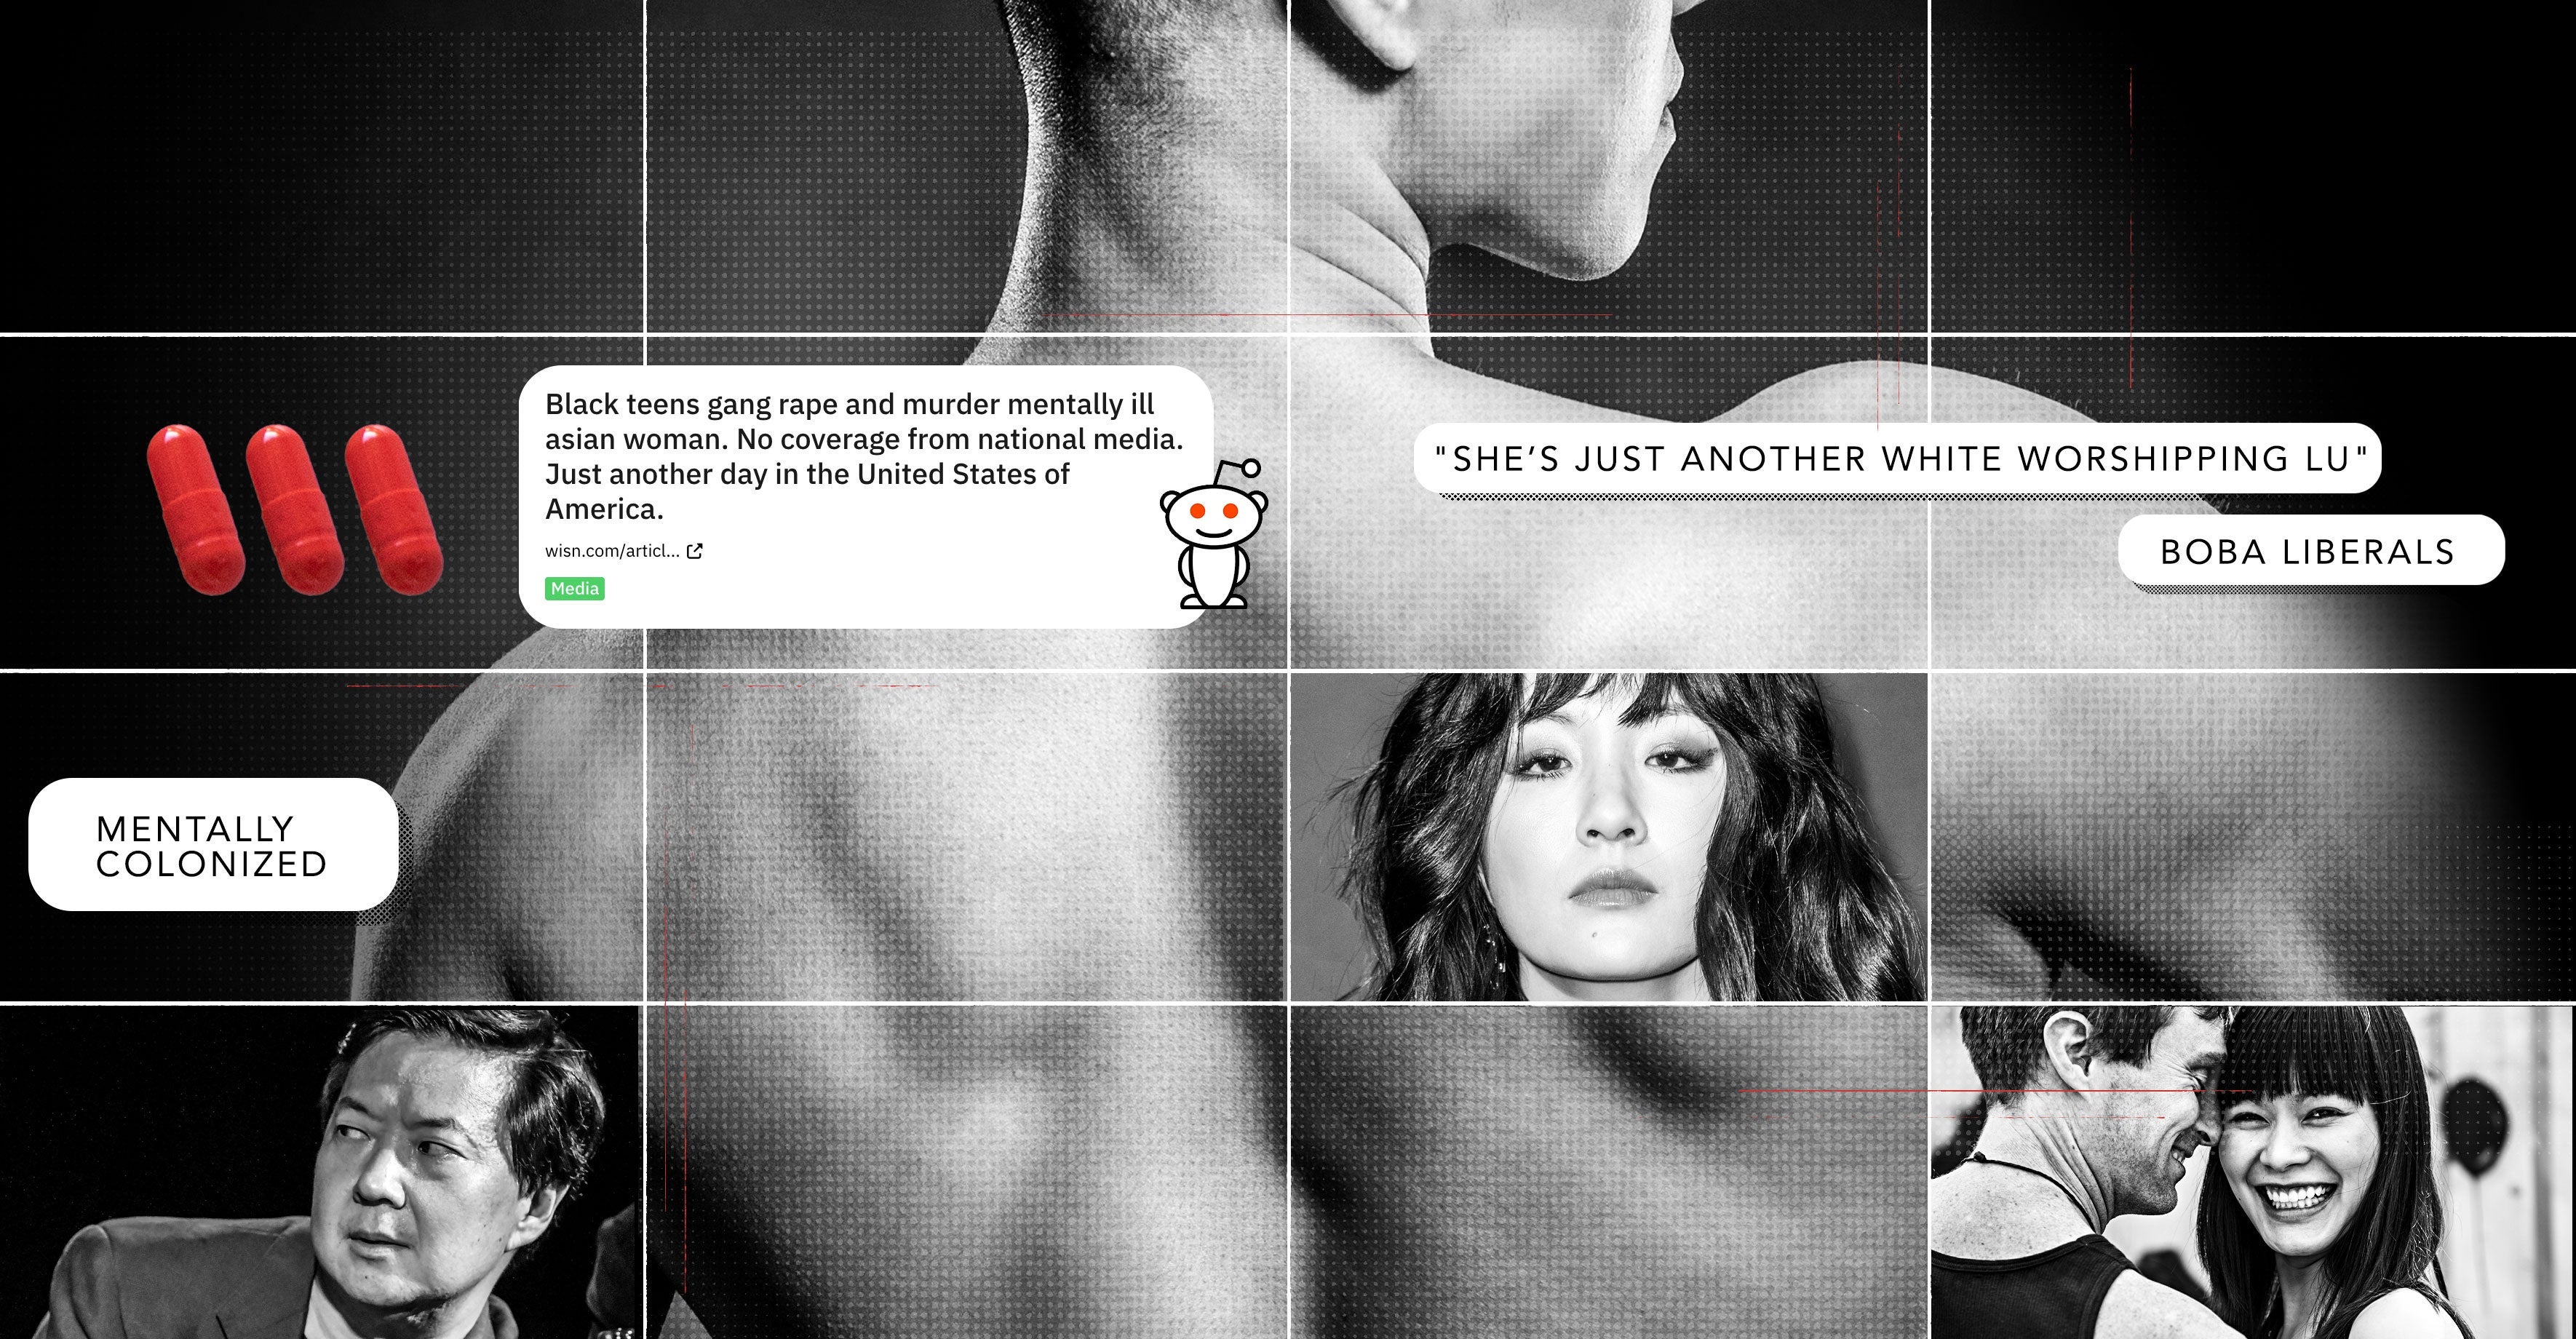 A photo of an Asian man's back is divided into a grid of squares, some of which contain text bubbles and Reddit posts. Other squares include photos of Constance Wu, Ken Jeong, and a couple consisting of a white man and Asian woman, and an image of three red pills.